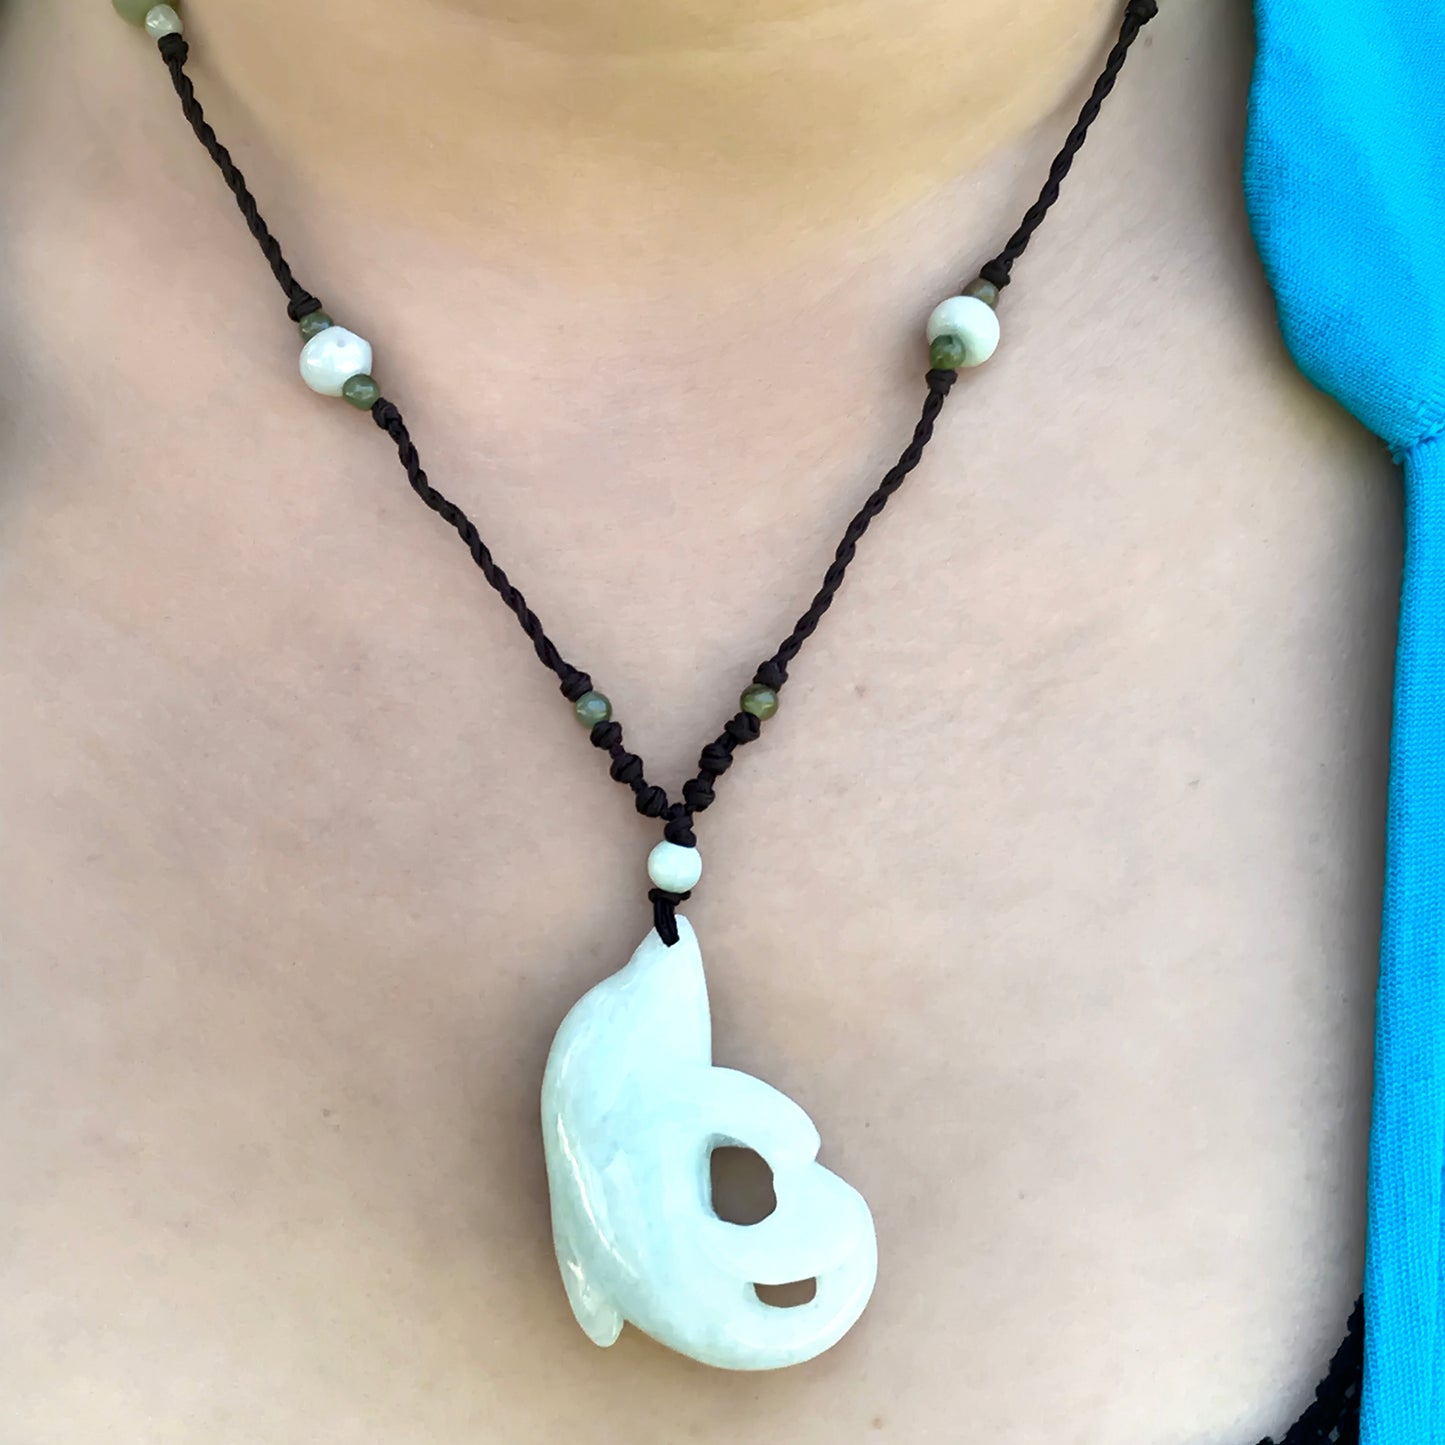 Find Joy and Freedom with the Dolphin Handmade Jade Necklace